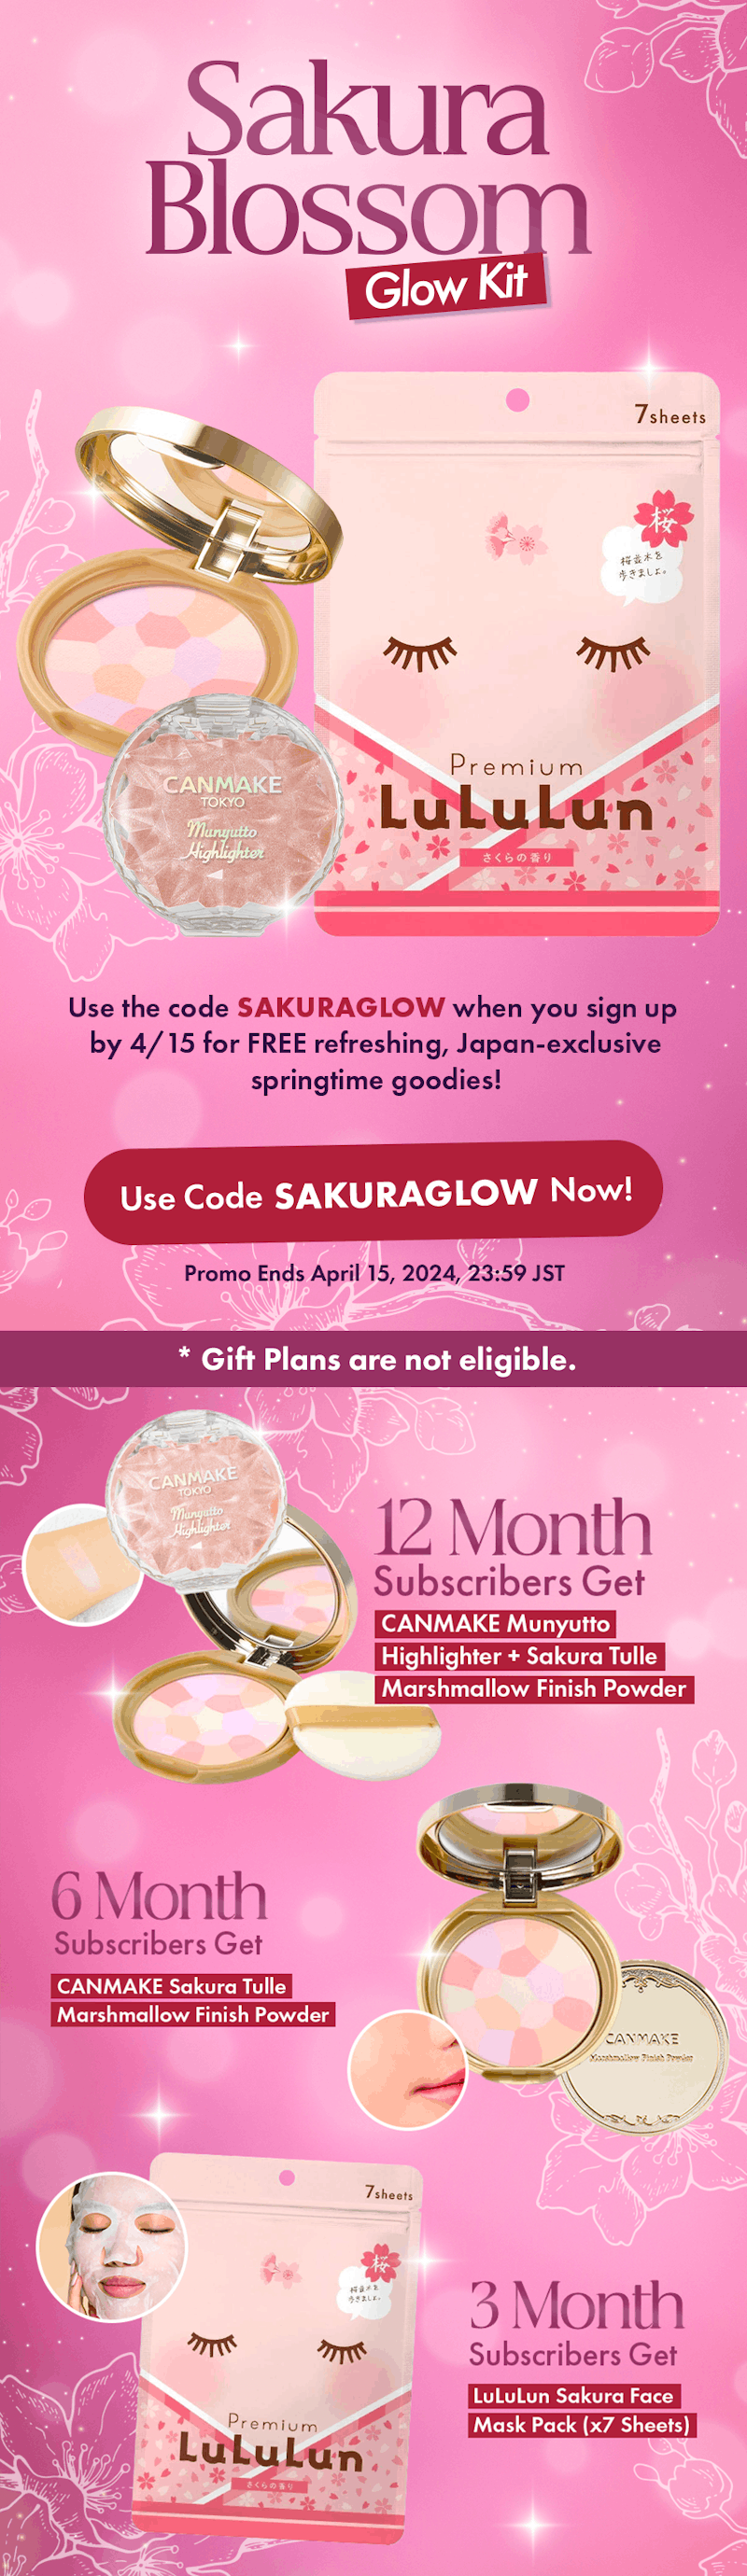 nomakenolife use the code SAKURAGOW when you sign up by 4/15 for your FREE Sakura Blossom Glow Kit items!